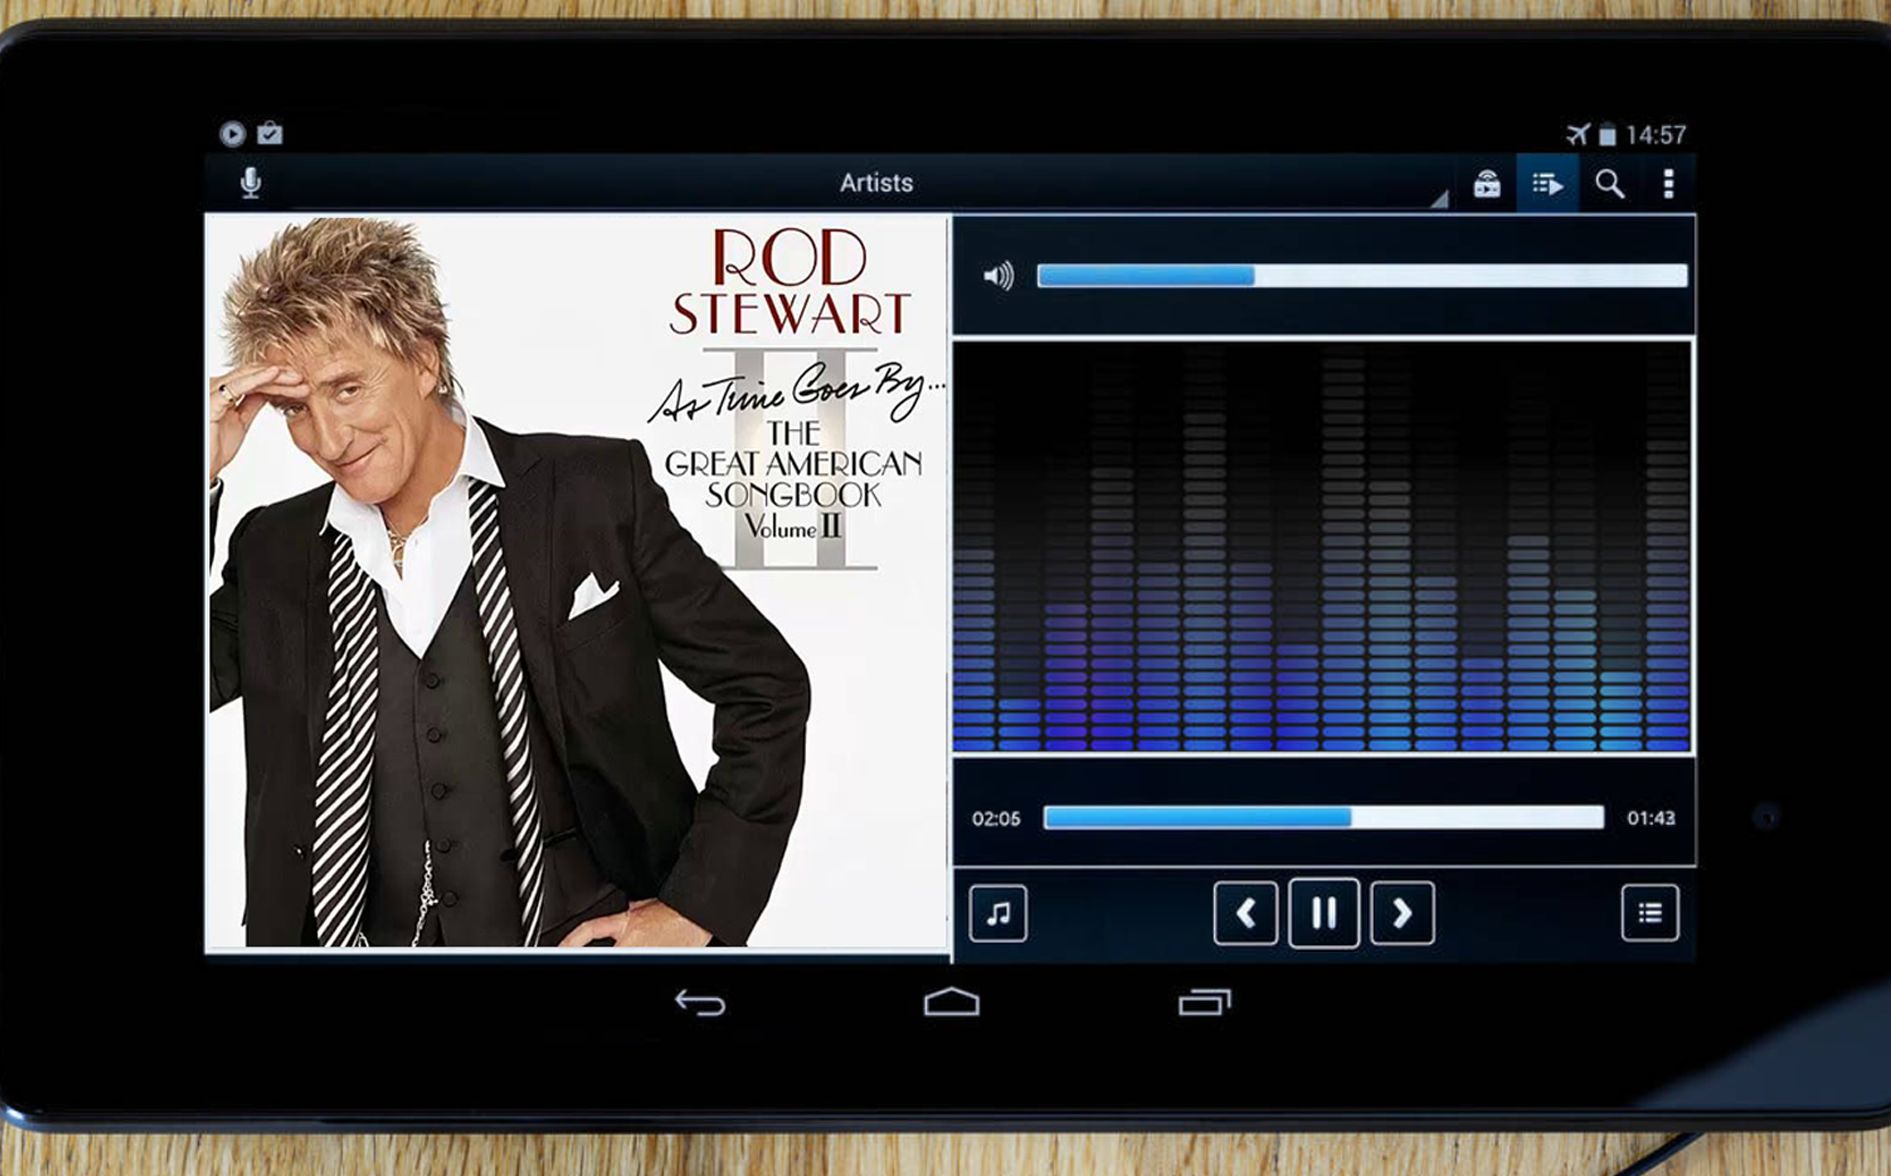 Music Legend – Rod Stewart – our catalogue includes several of his works